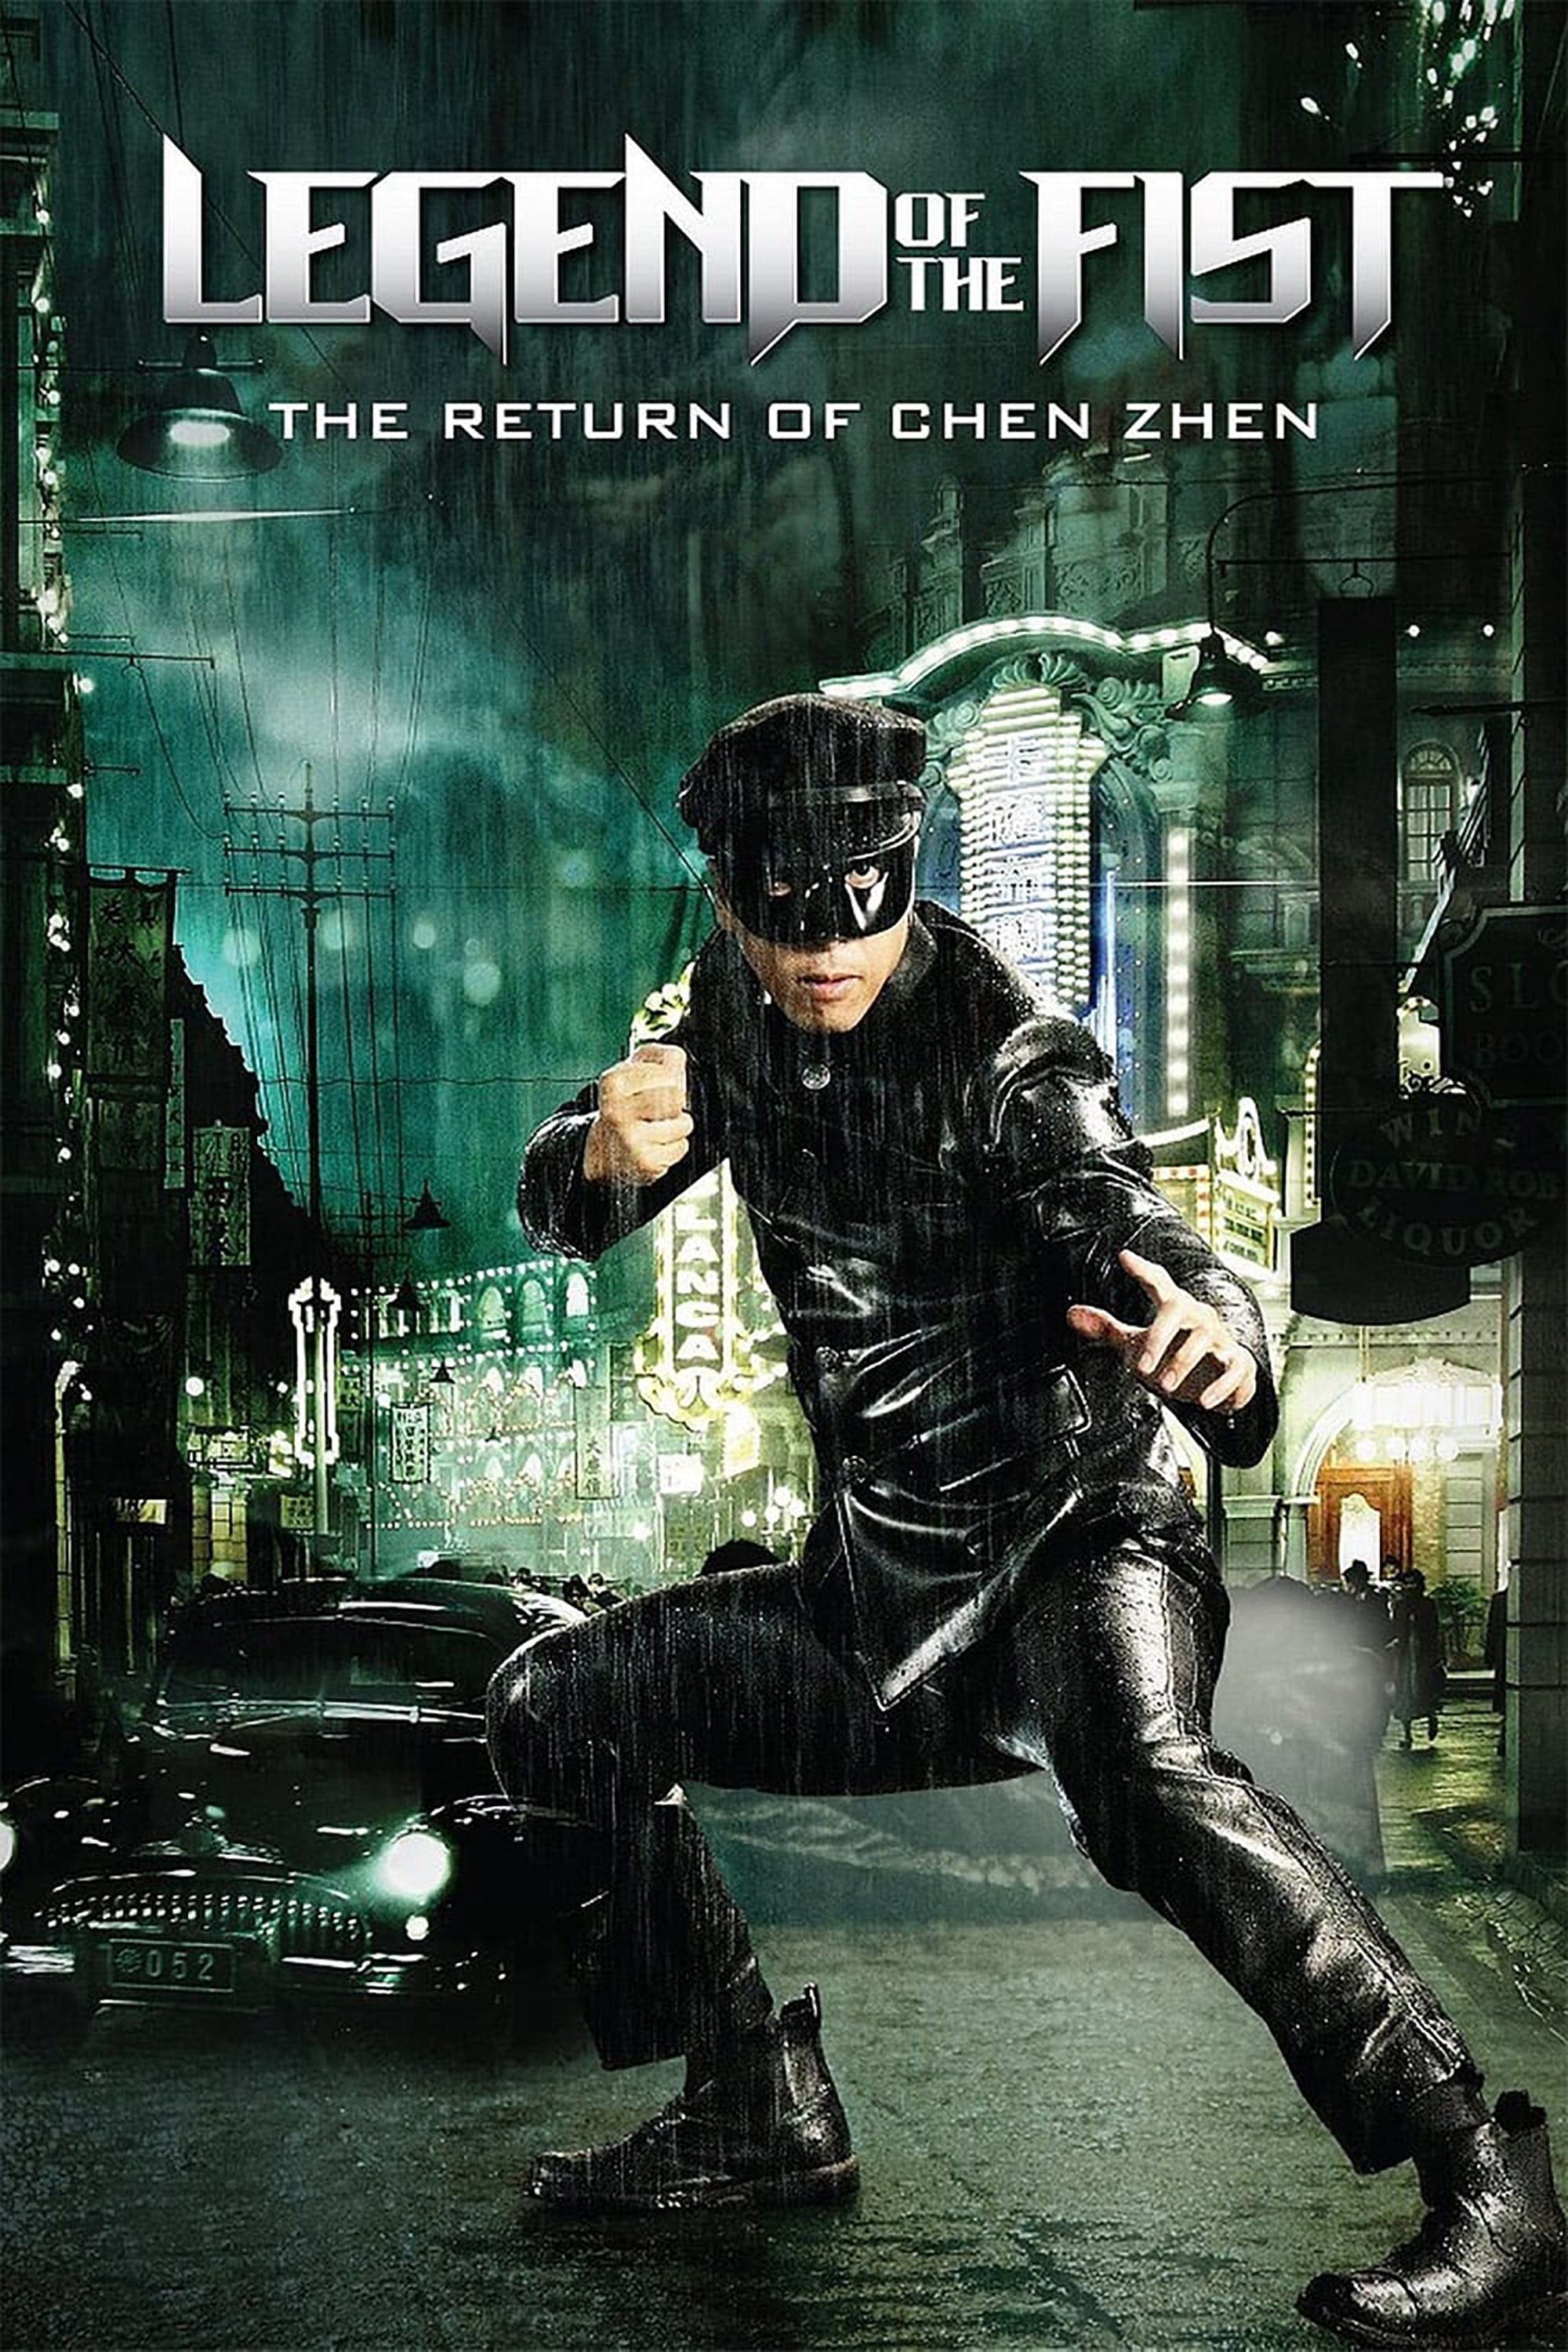 Poster Phim Legend of the Fist: The Return of Chen Zhen (Legend of the Fist: The Return of Chen Zhen)